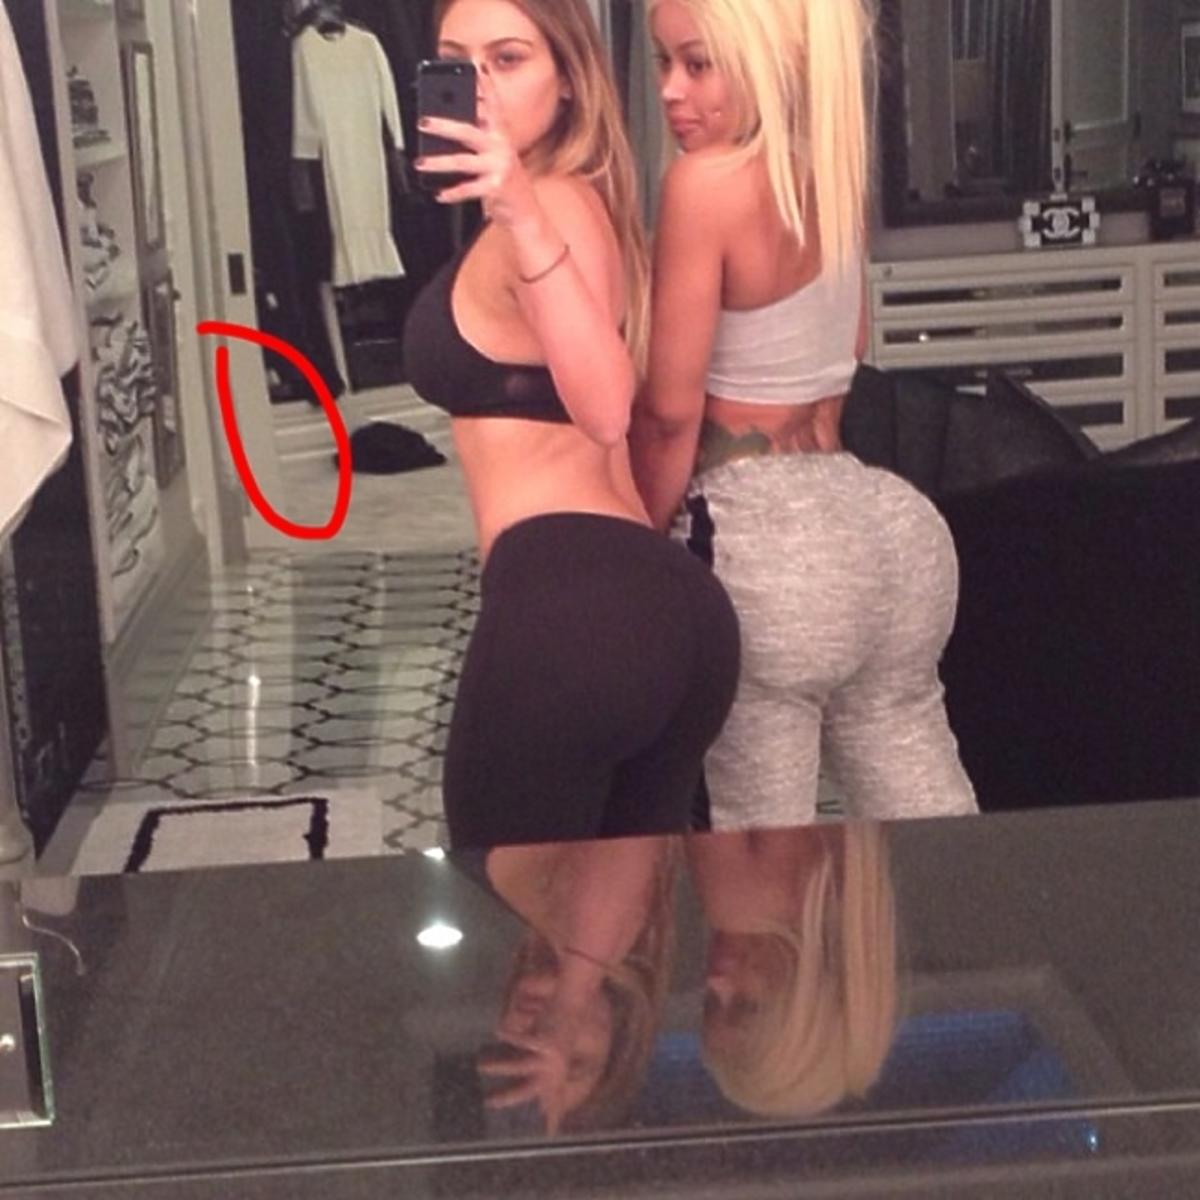 Unphotoshopped Pictures of the Kardashians and Jenners to Laugh At image